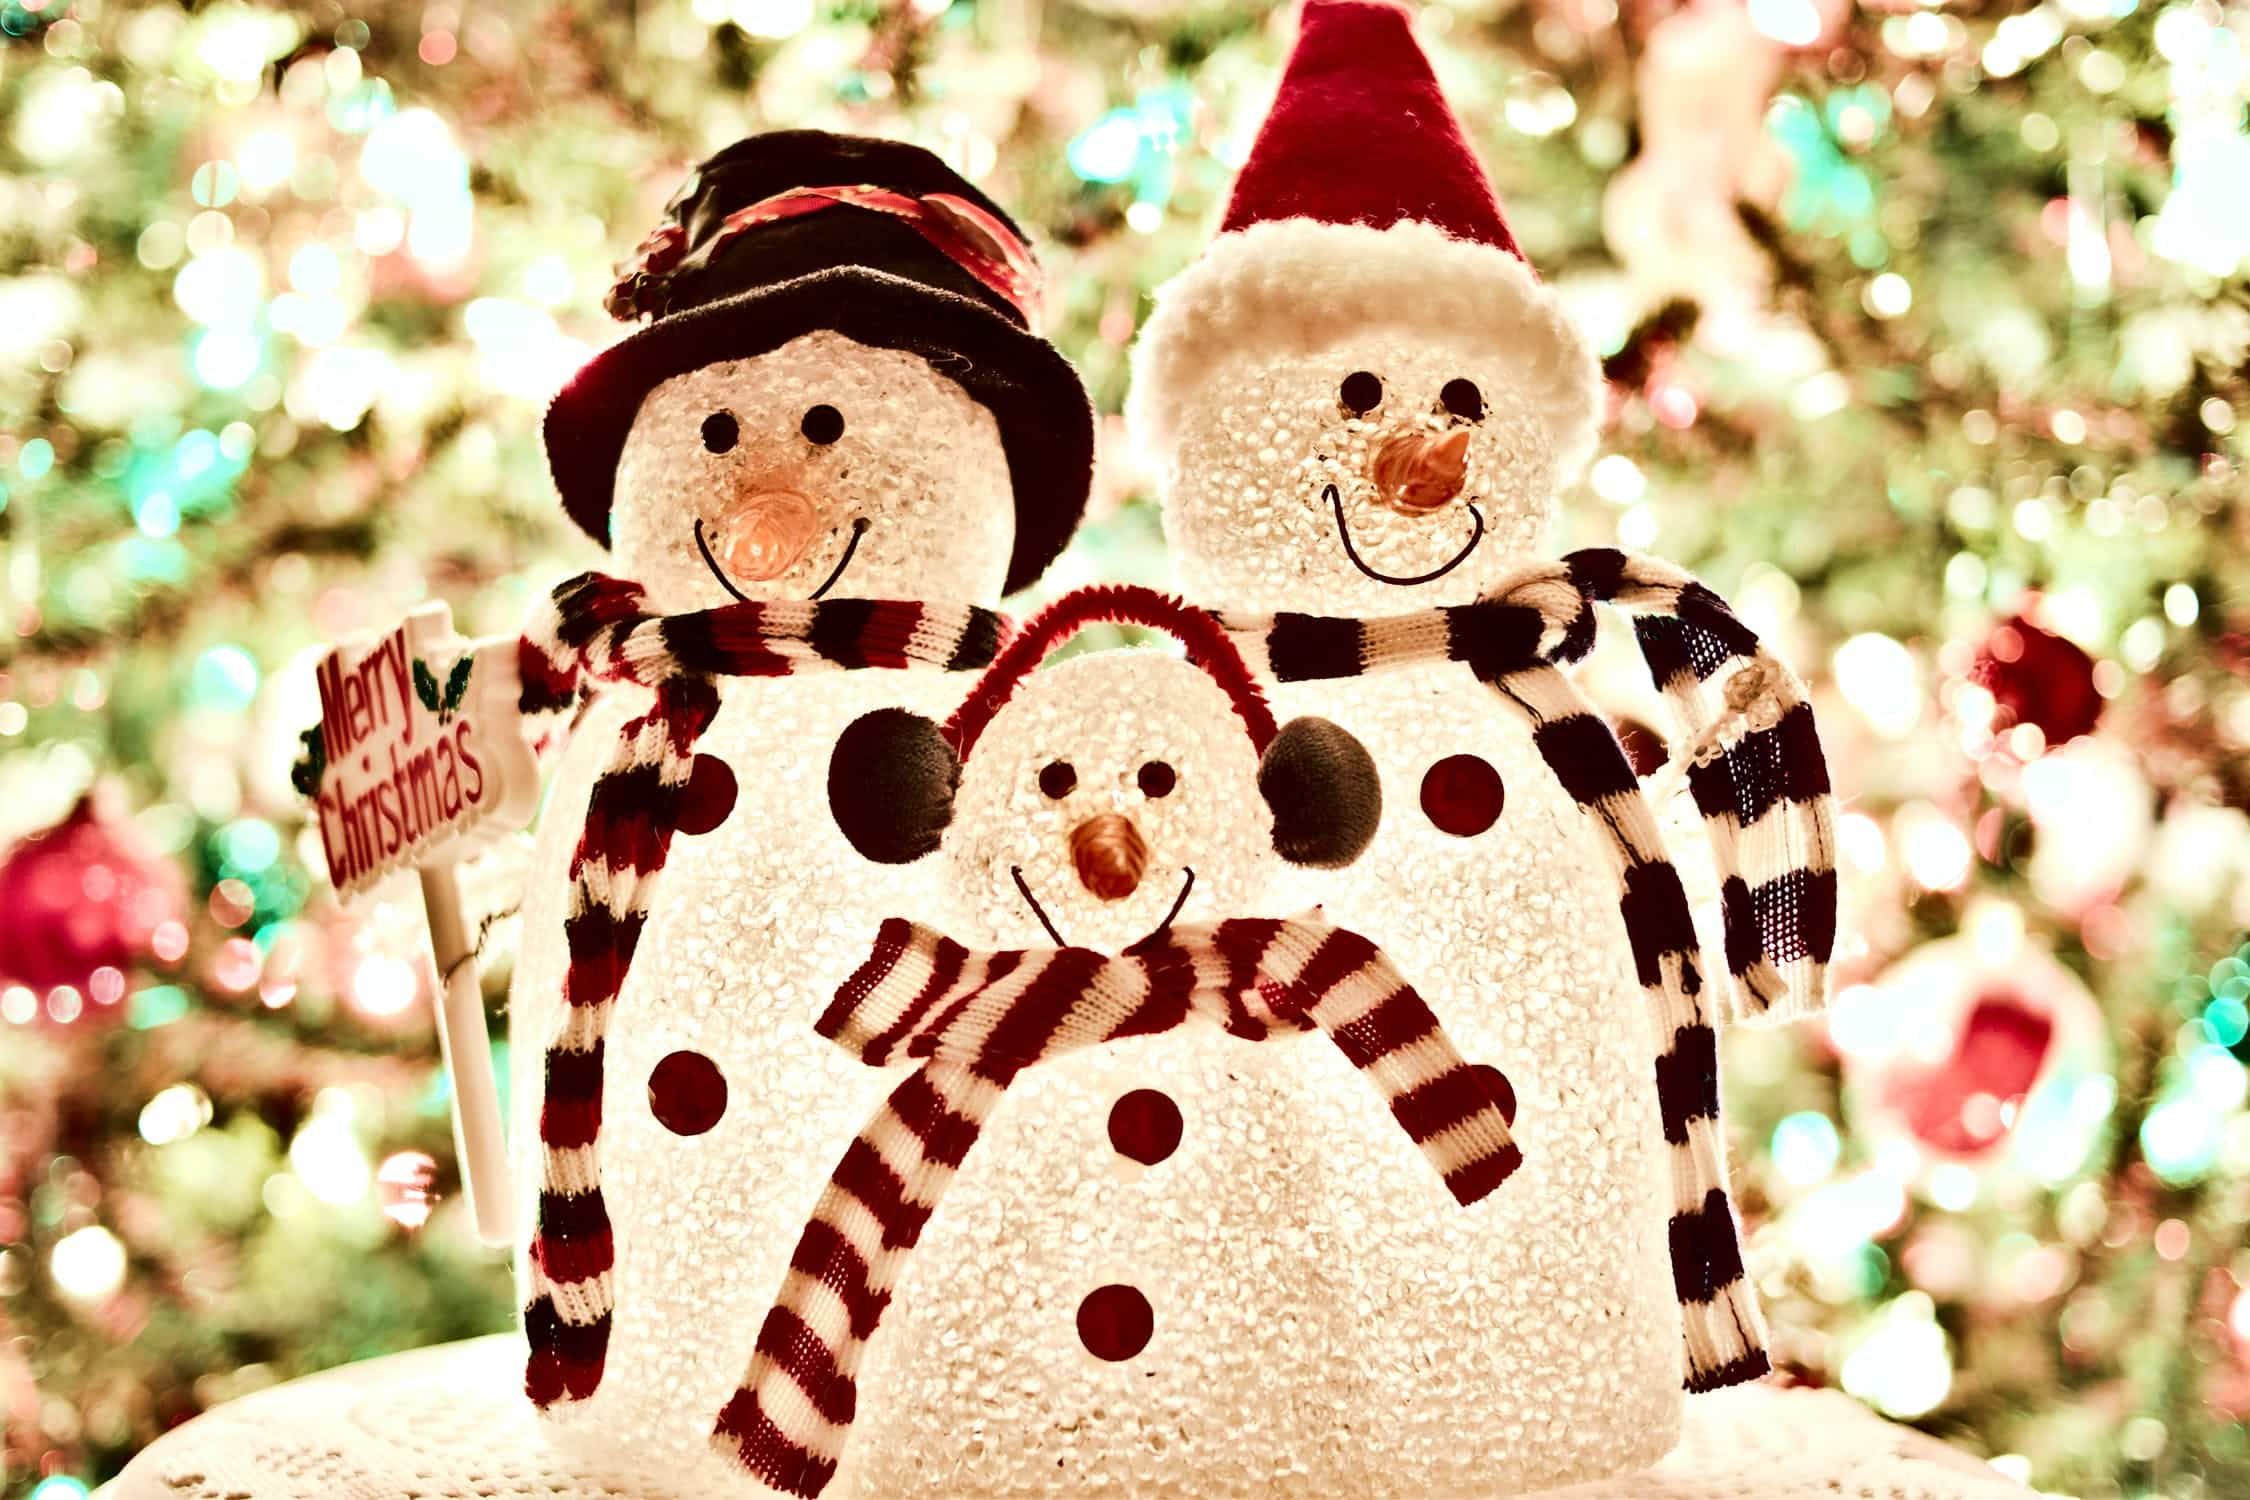 Family themed snowman wearing christmas inspired clothings